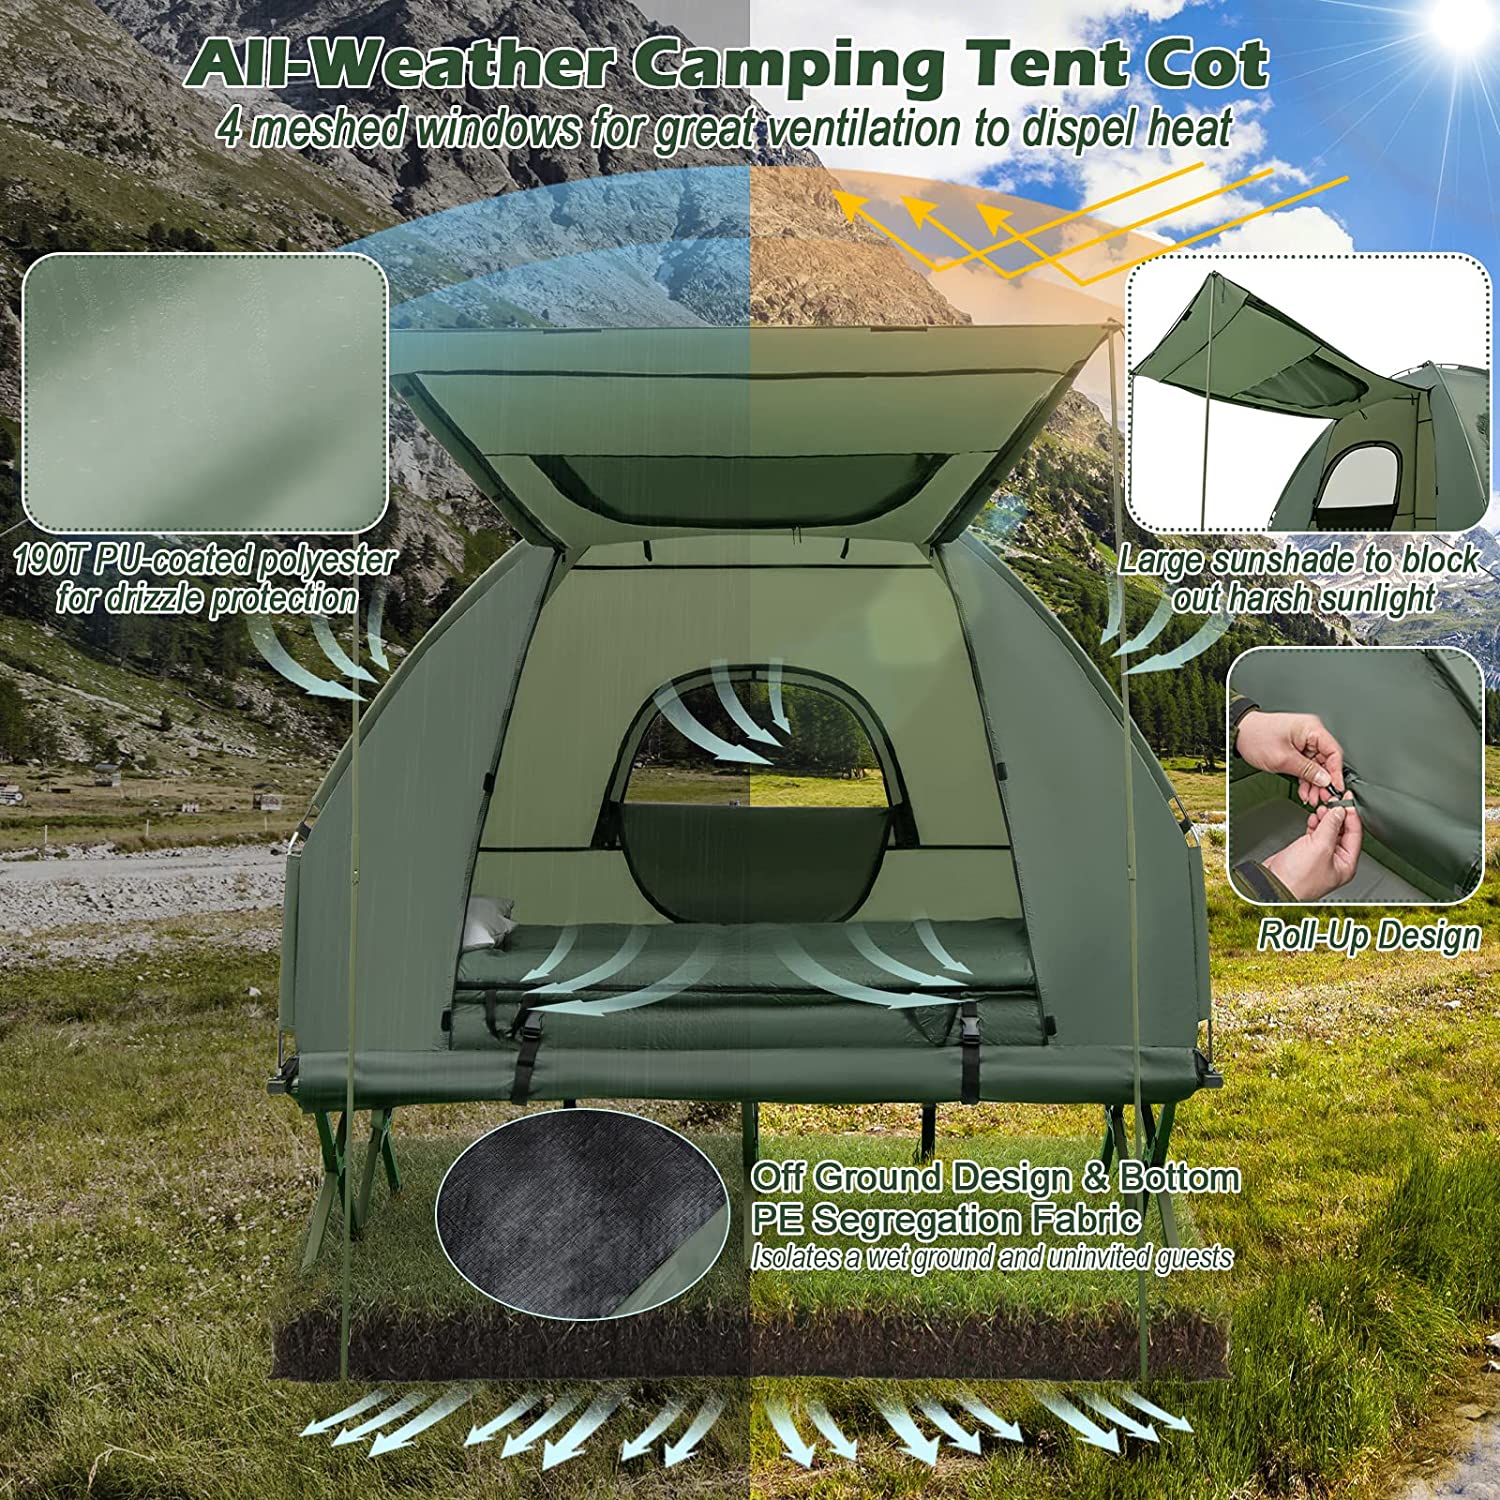 5-in-1 Tent Cot Portable 2-Person Camping Tent Combo with Awning Air Mattress Sleeping Bag for Hiking Picnic